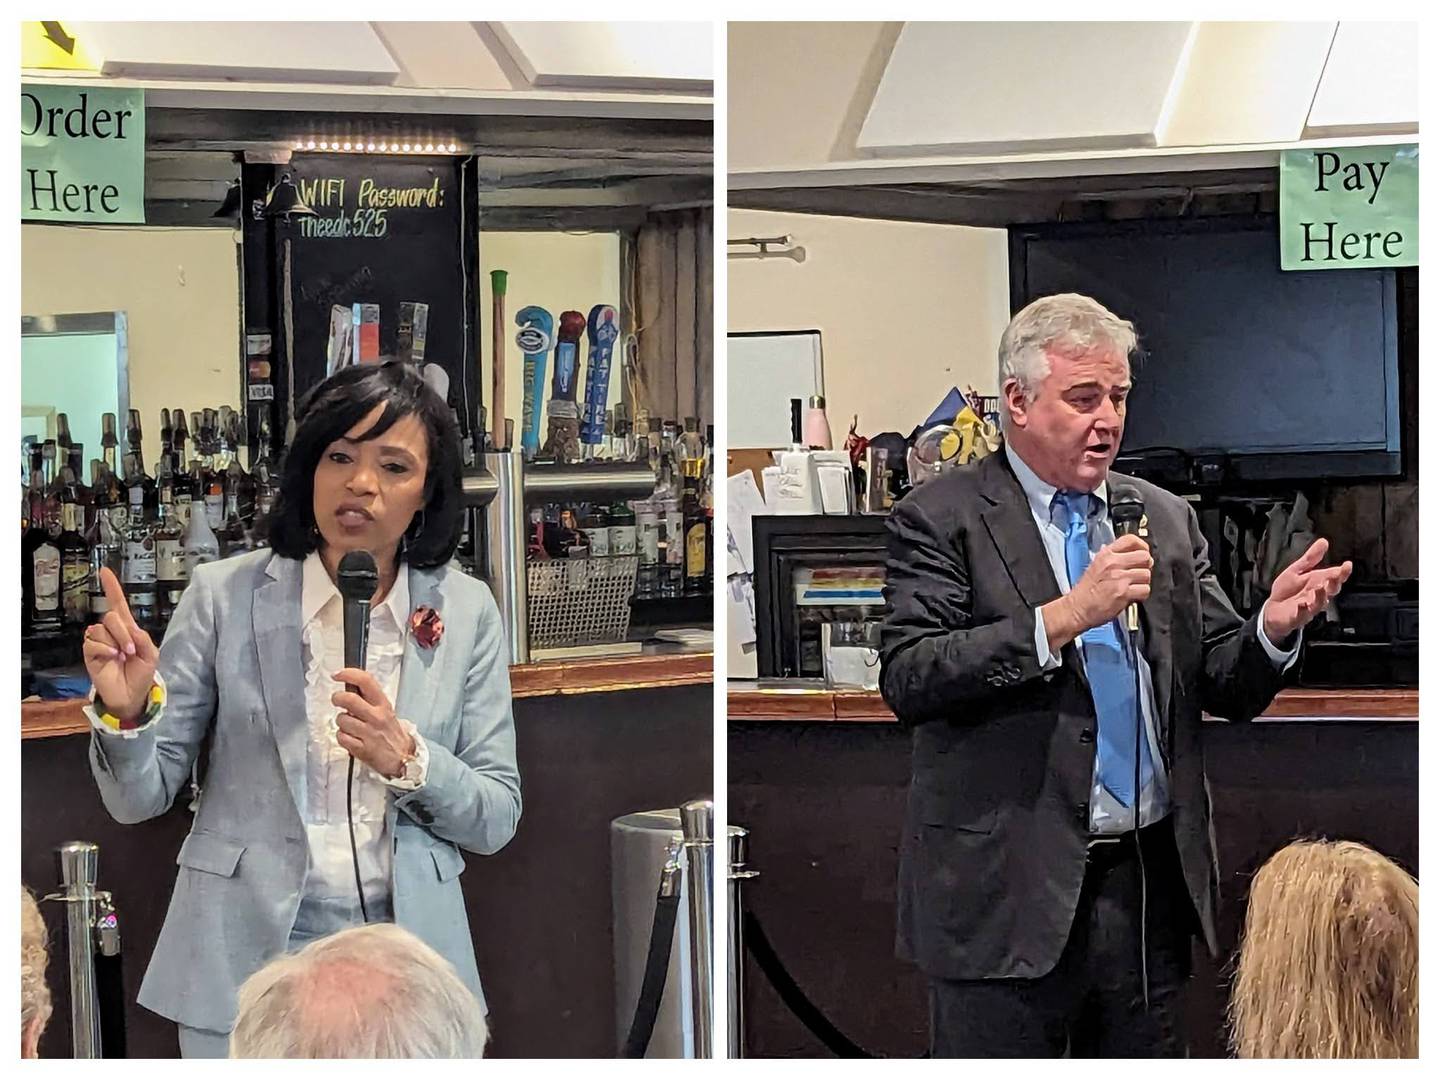 Angela Alsobrooks and David Trone speak at the Almost 7:30 Democratic Club in Annapolis months apart.